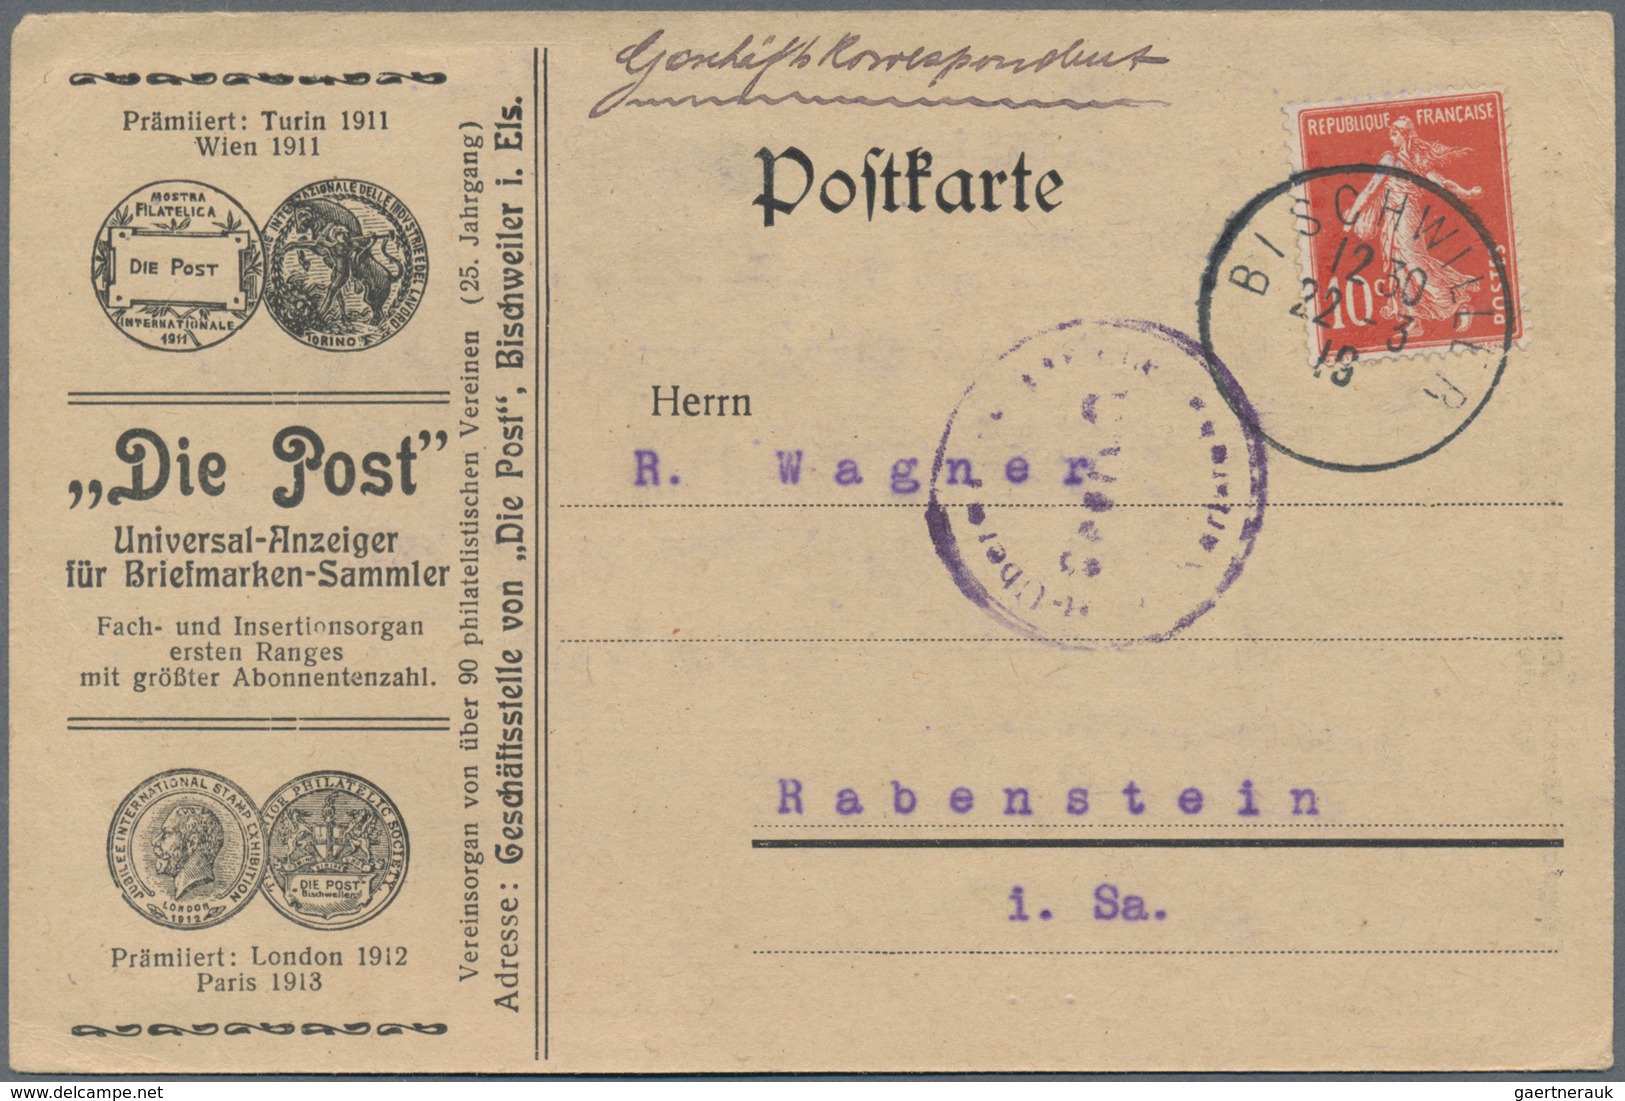 Frankreich: Starting About 1850 Holding Of Ca. 470 Covers, Cards, Folded Letters And Postal Statione - Sammlungen